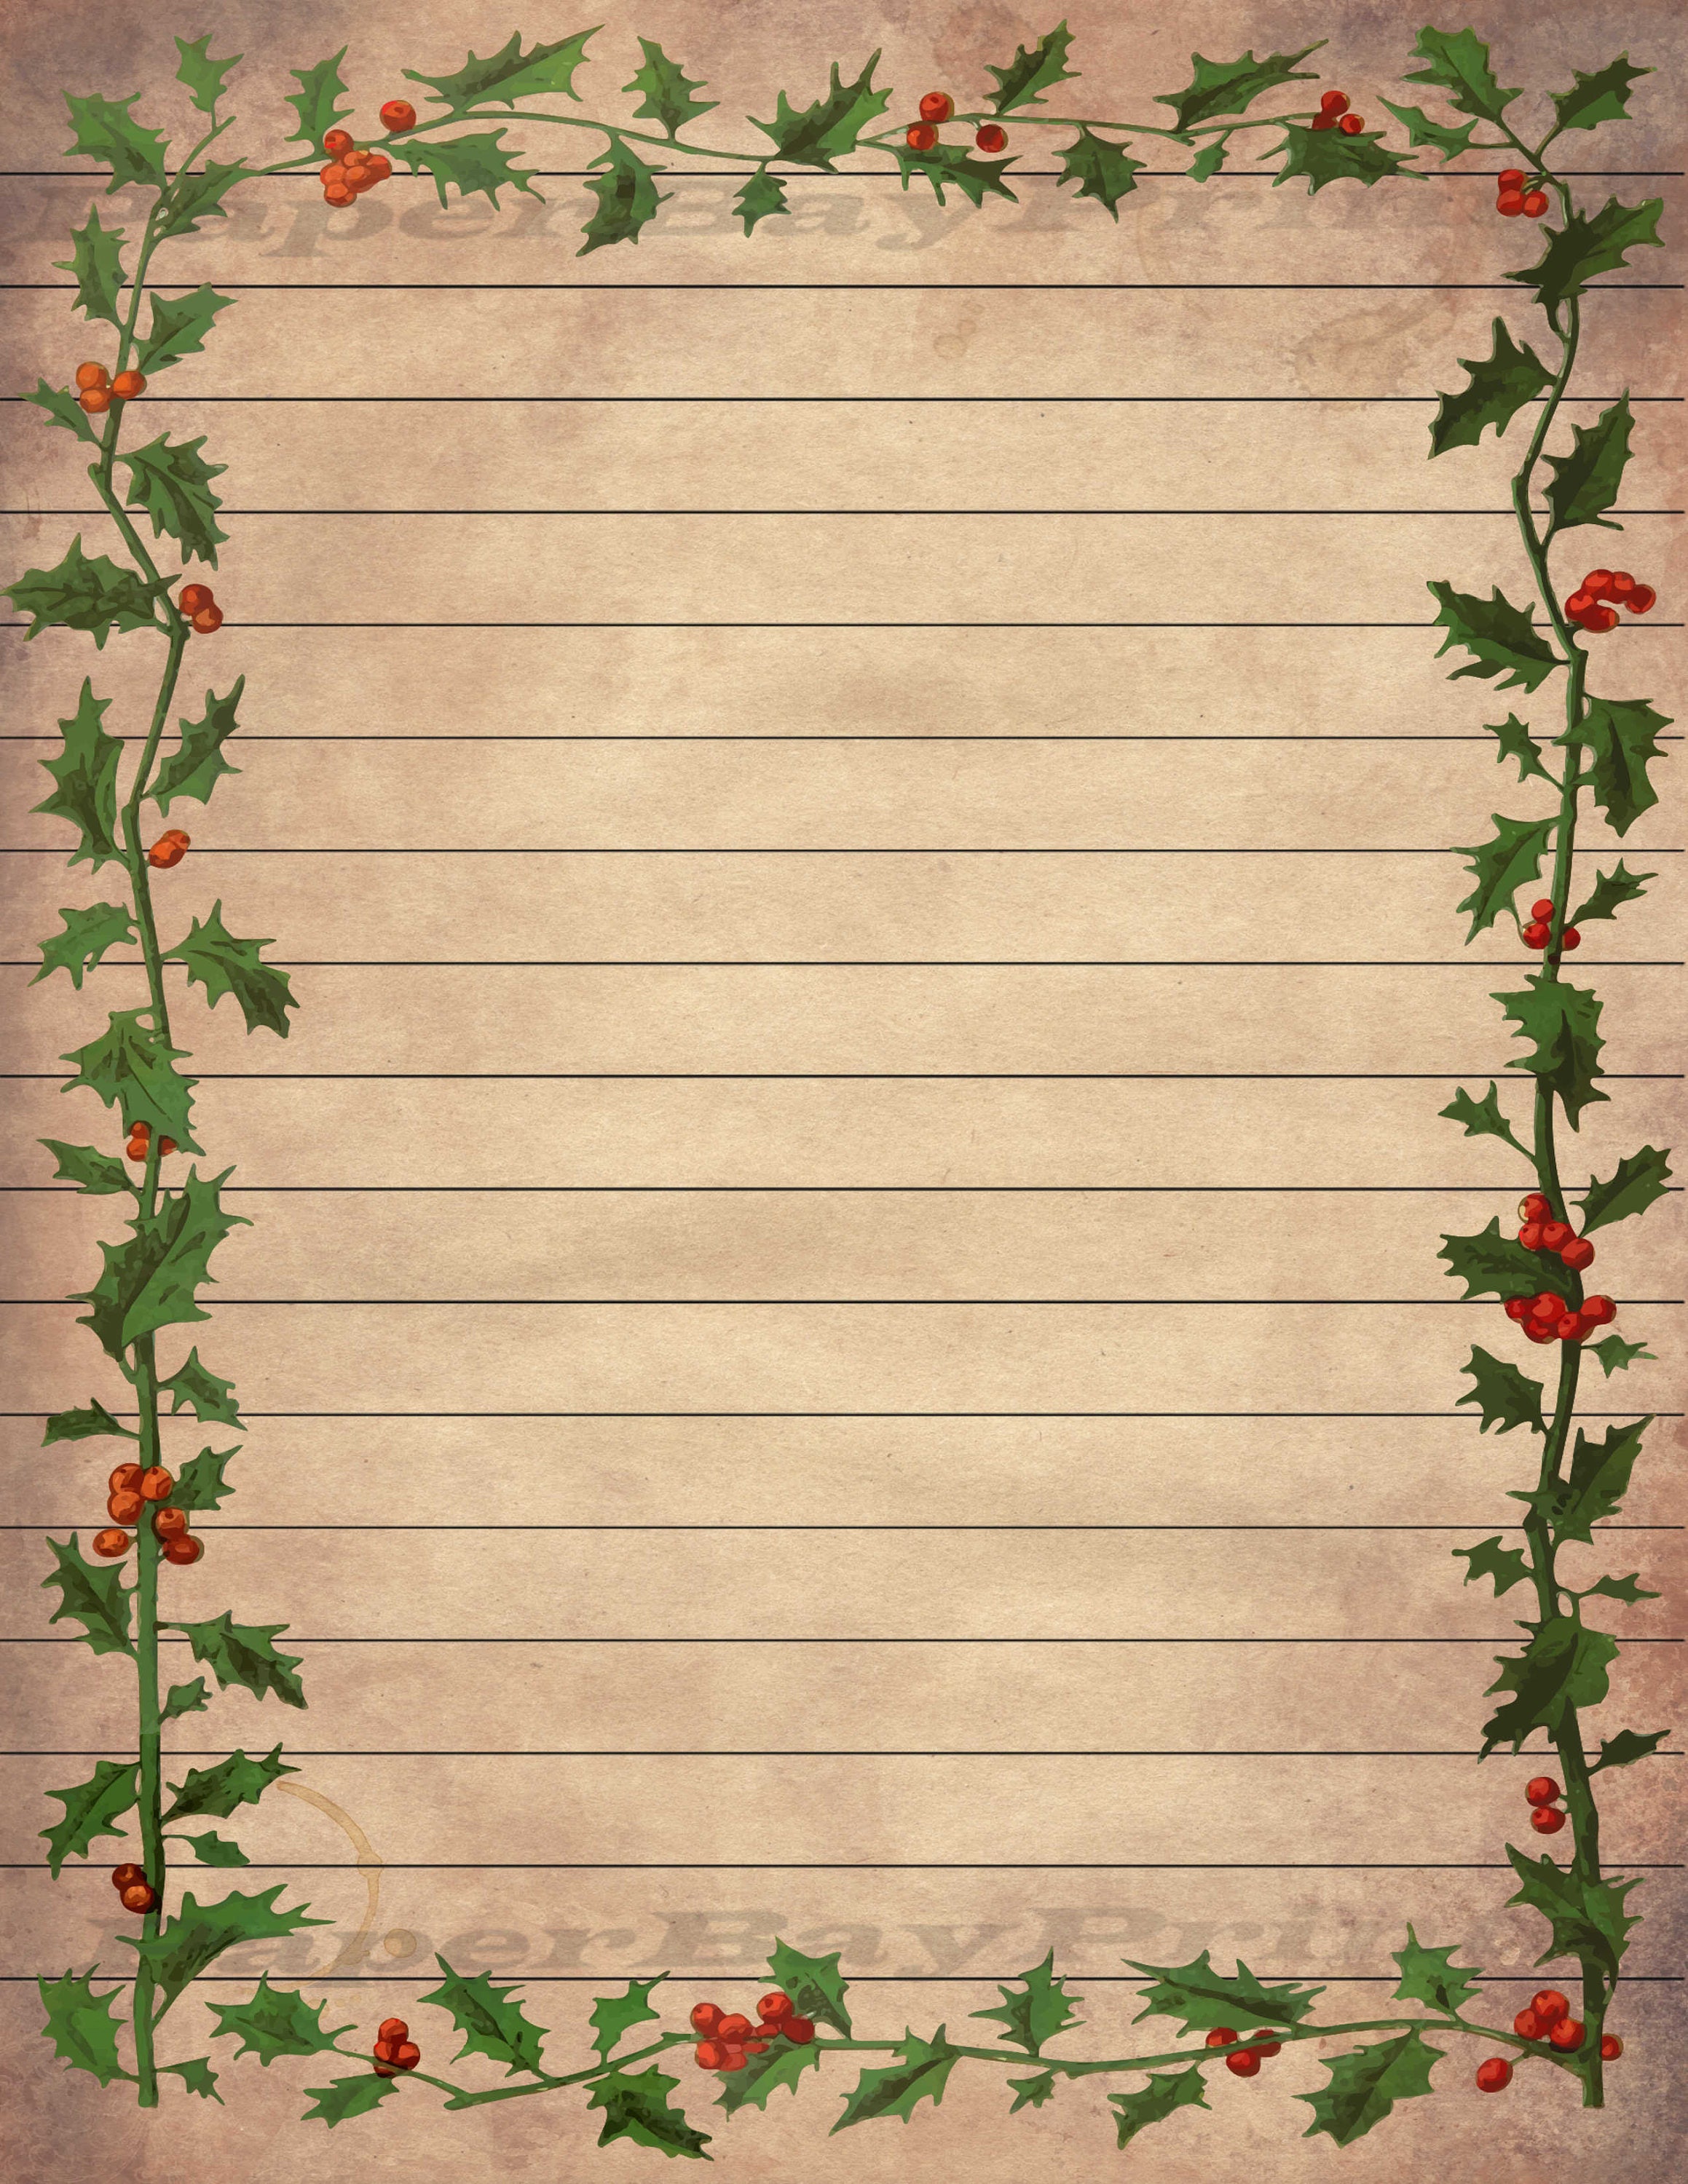 Printable Writing Paper, Vintage Christmas Holly Border, Old Scrapbook Paper, Background, Lined ...